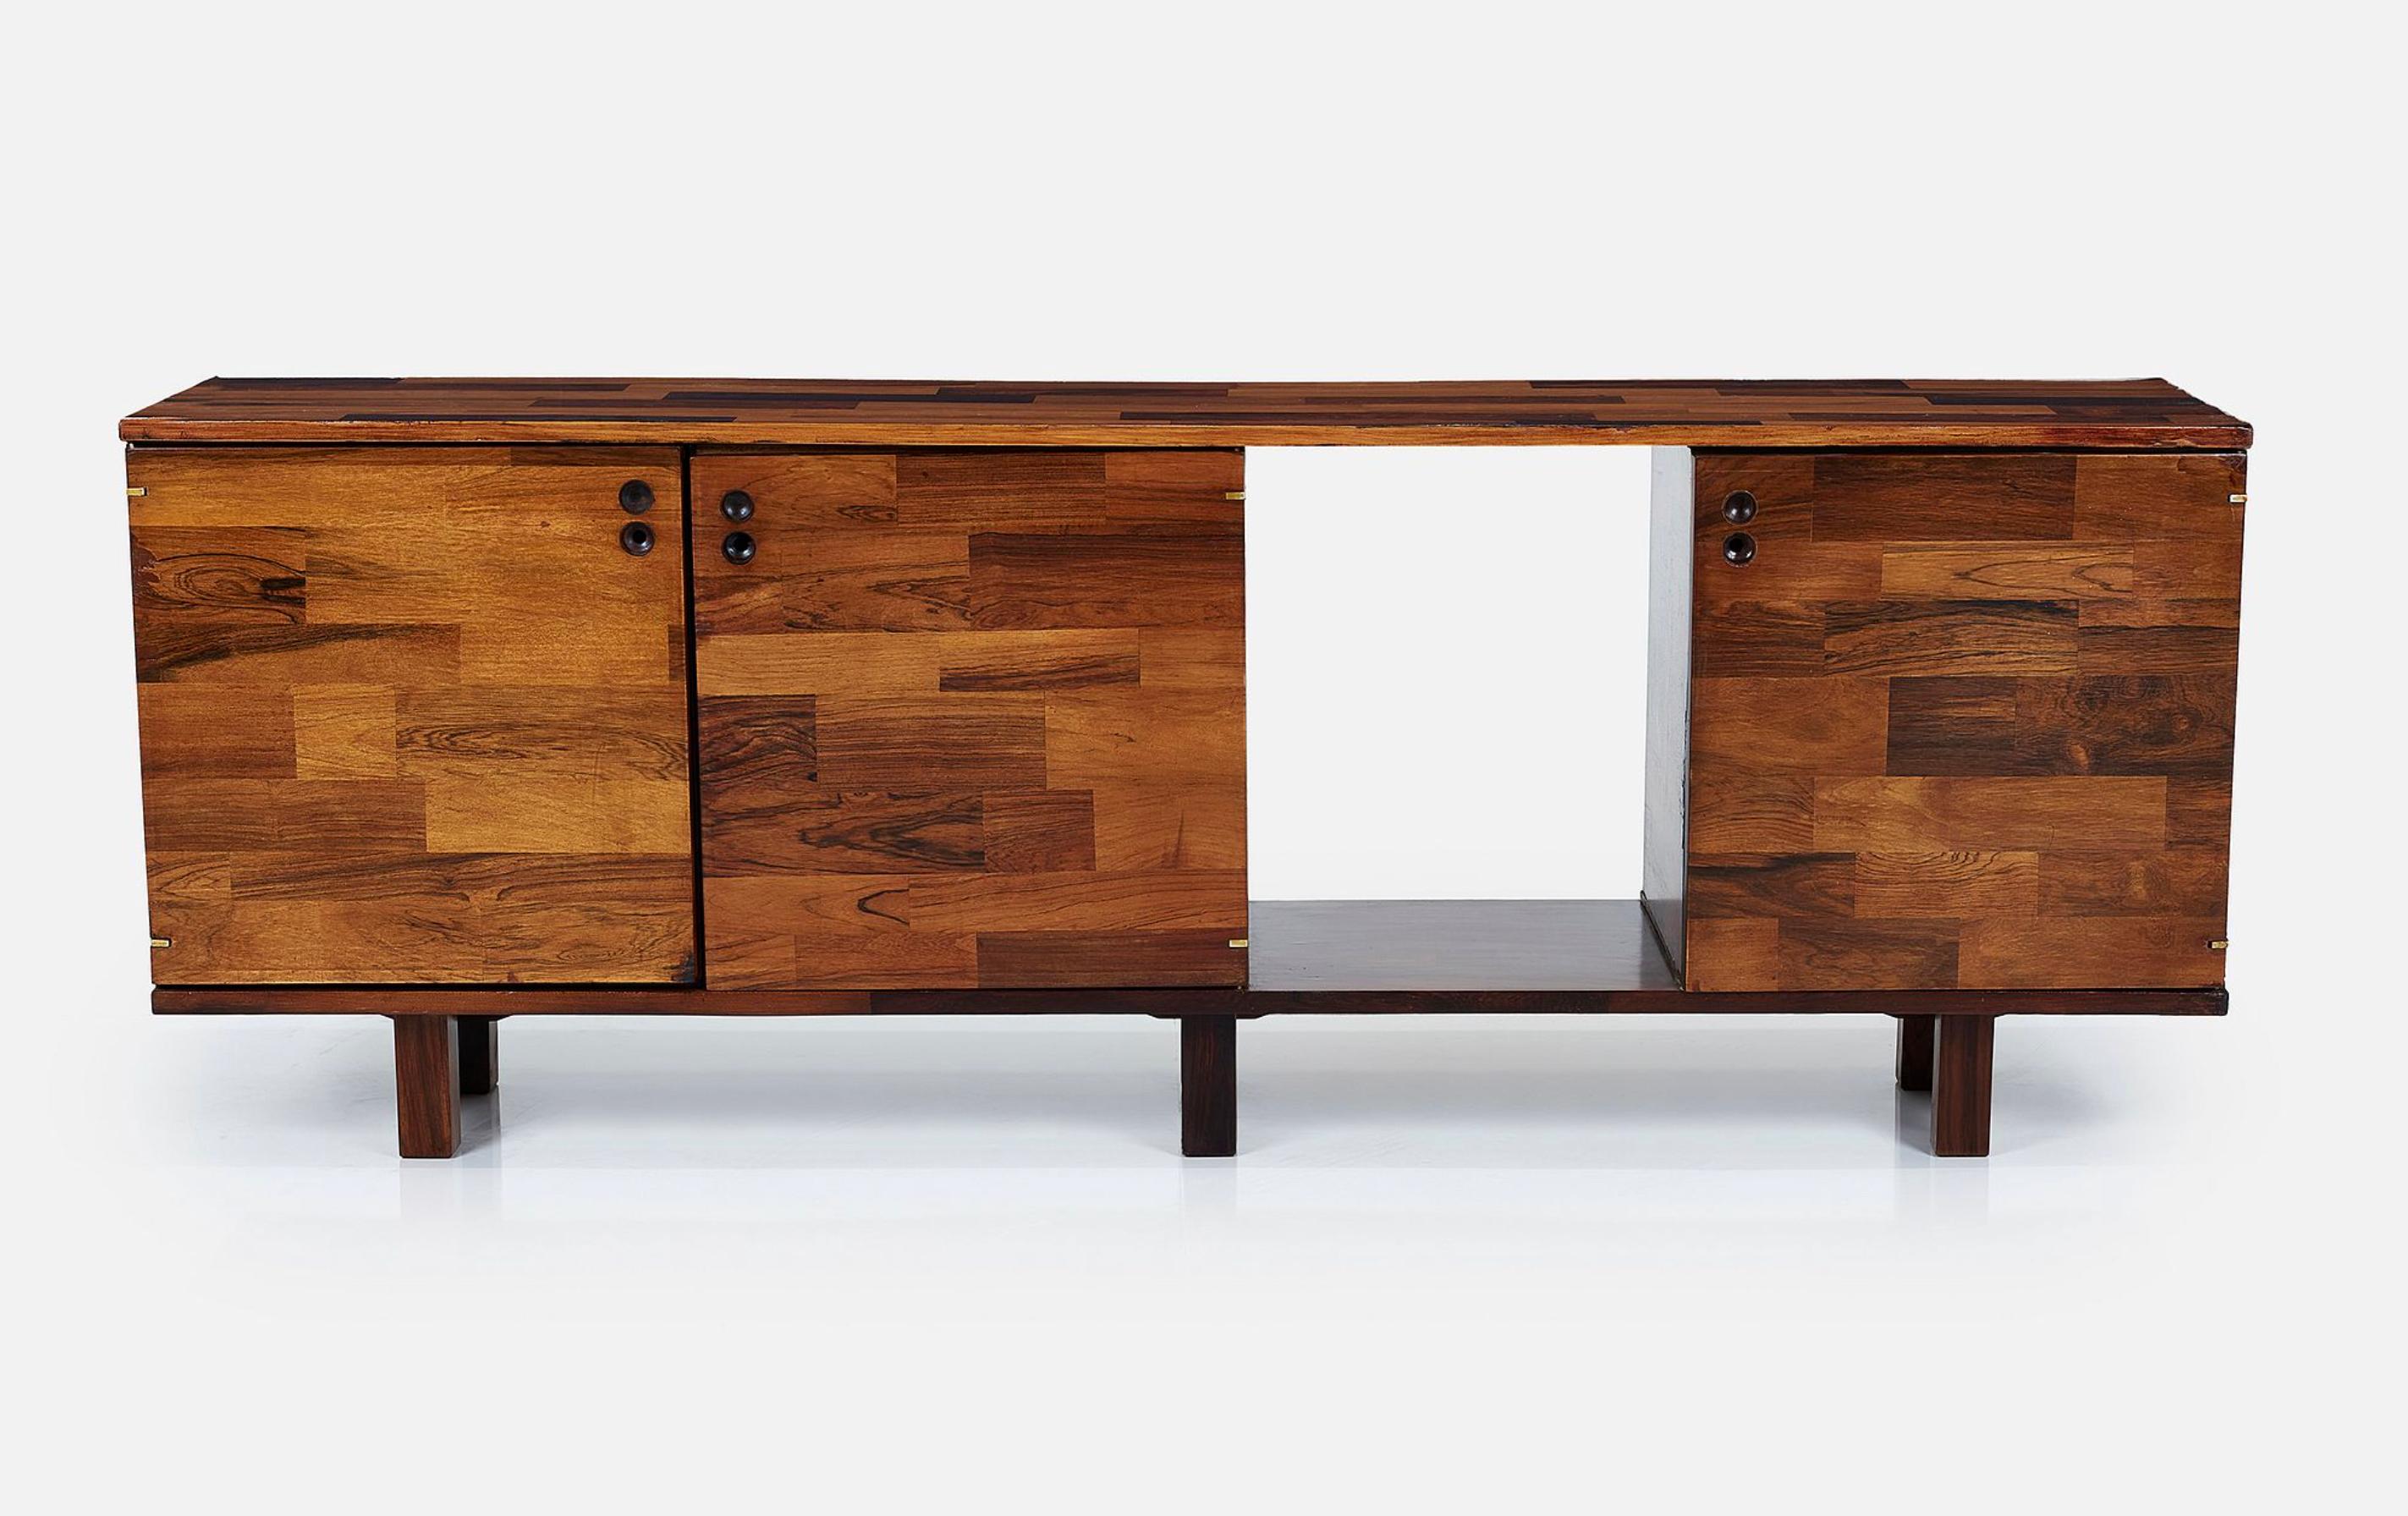 This iconic stunning rosewood credenza from the Componivel series was designed by Jorge Zalszupin (1922-2020) and manufactured by his own company, L'Atelier, in the 1960s.

It's instantly recognizable because the credenza is entirely covered with a